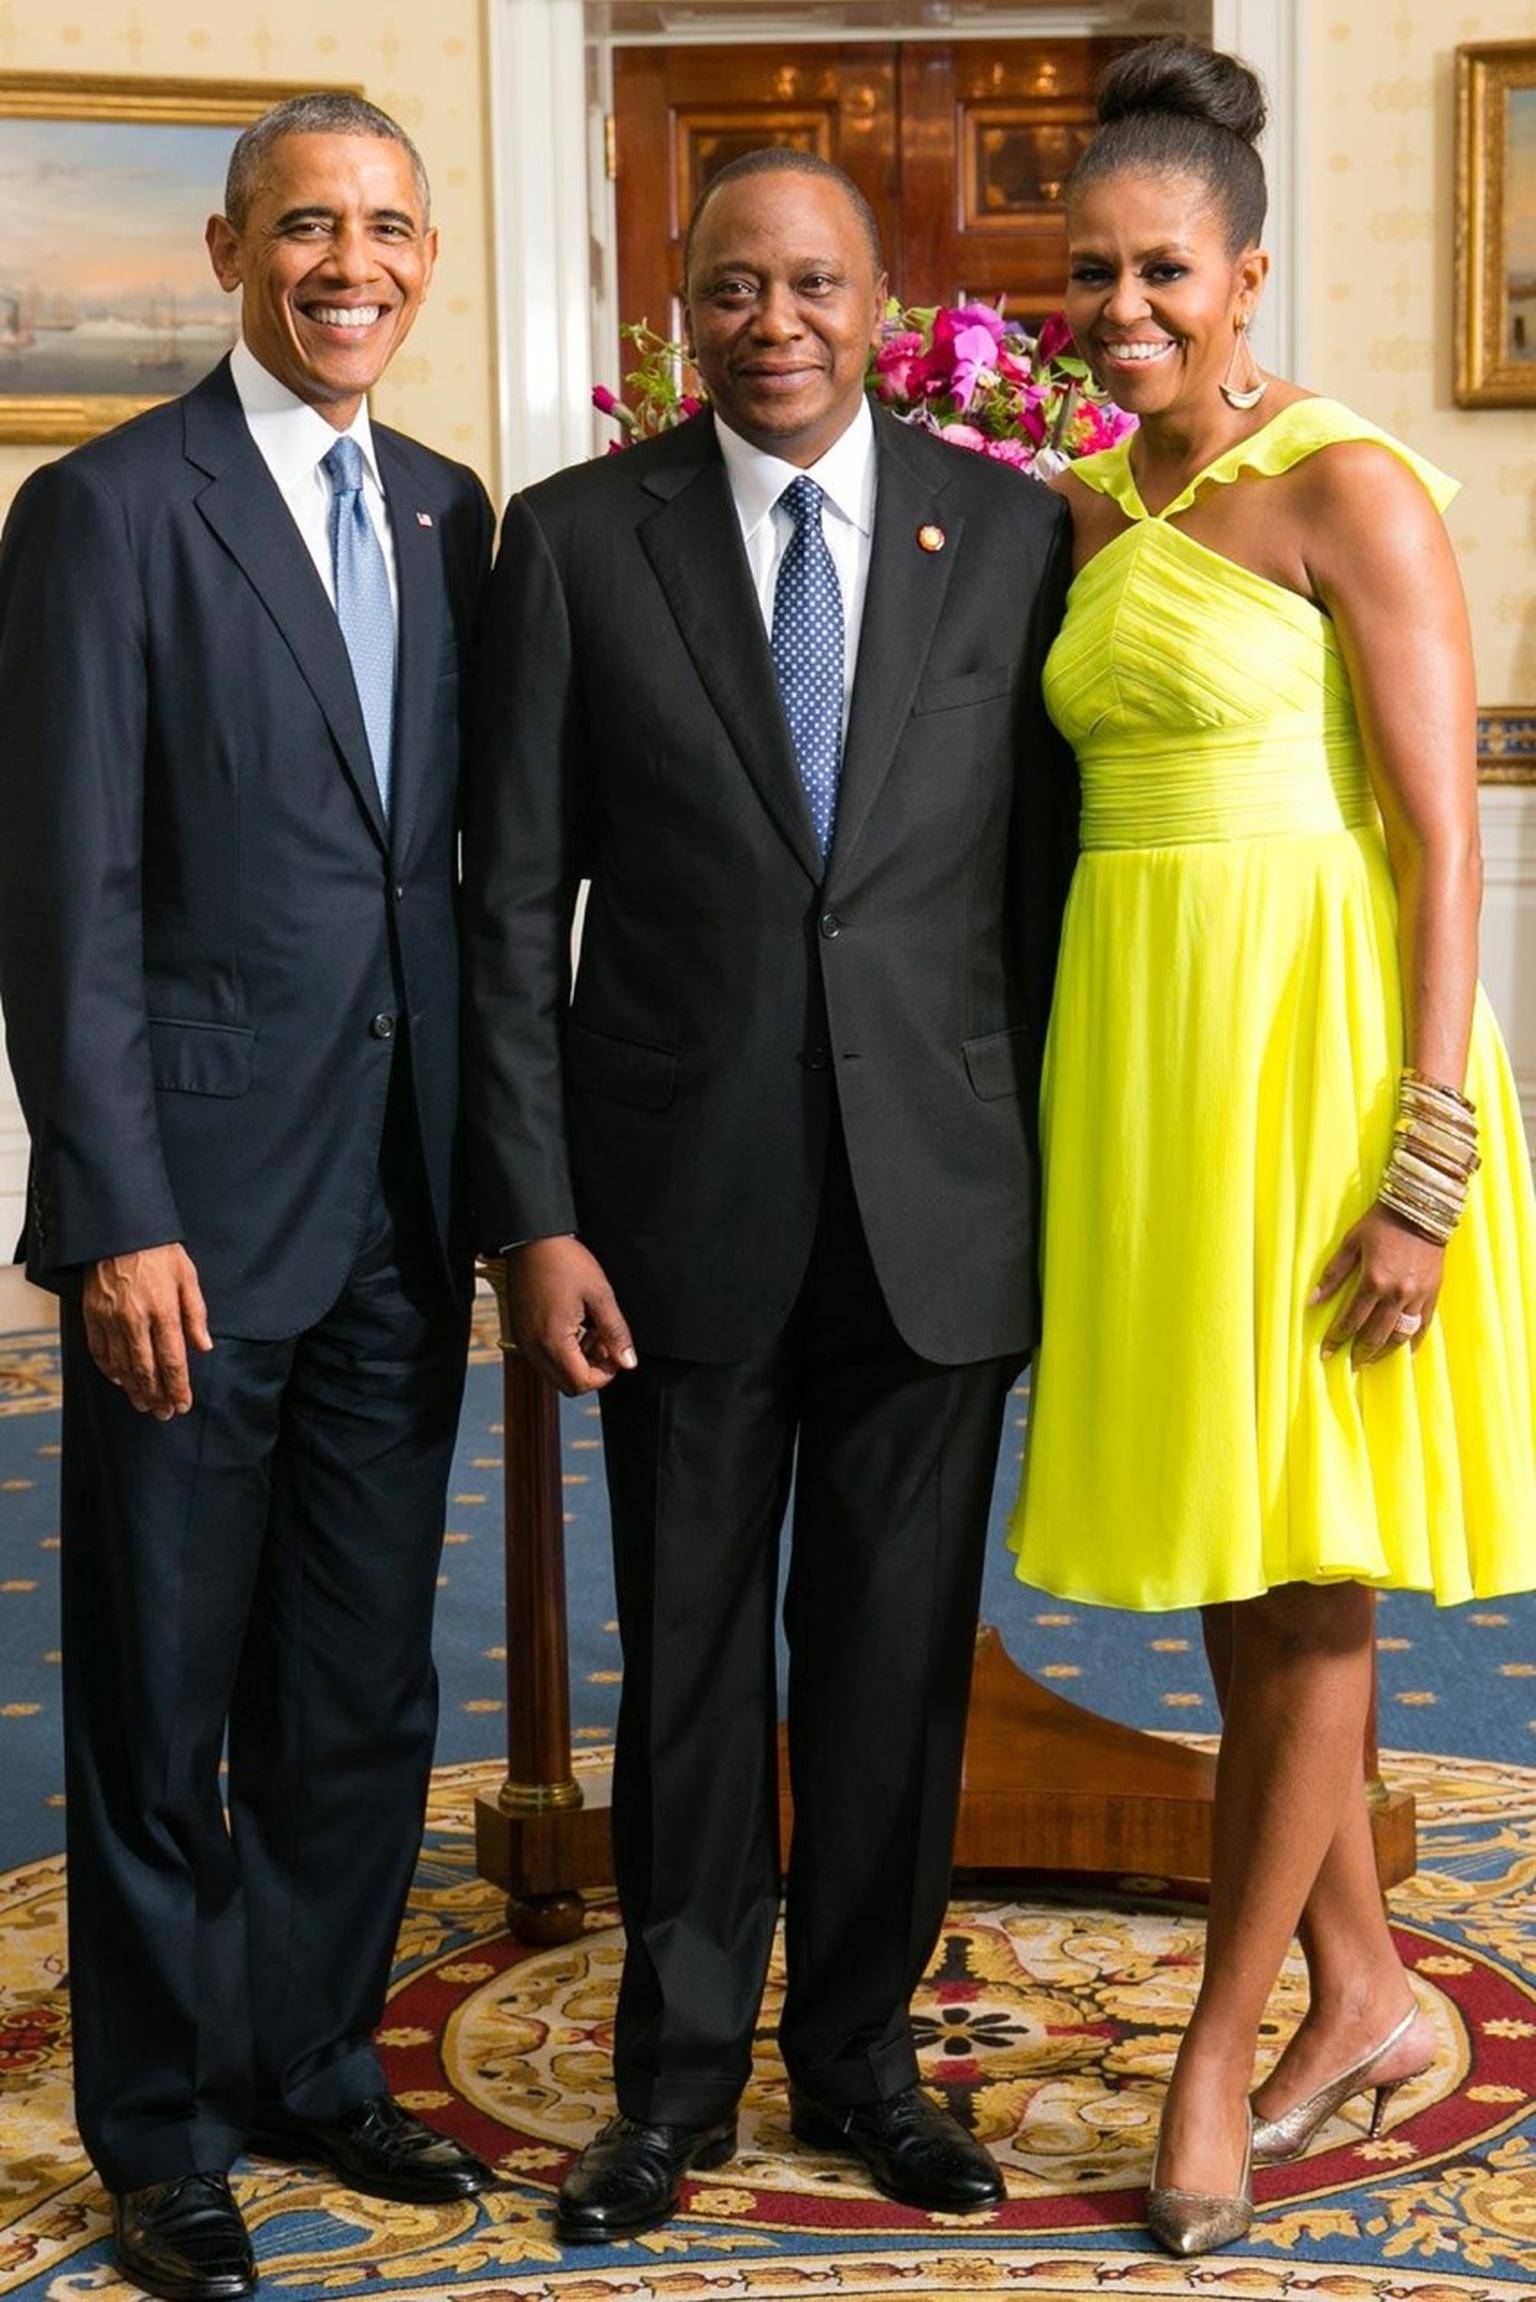 In a symbolic gesture captured in this photograph of the American president and his wife posing with Uhuru Kenyatta - the President of Kenya - the First Lady wore a stack of horn and bronze Nene Bangles by Ashley Pittman, made by artisans in workshops in 